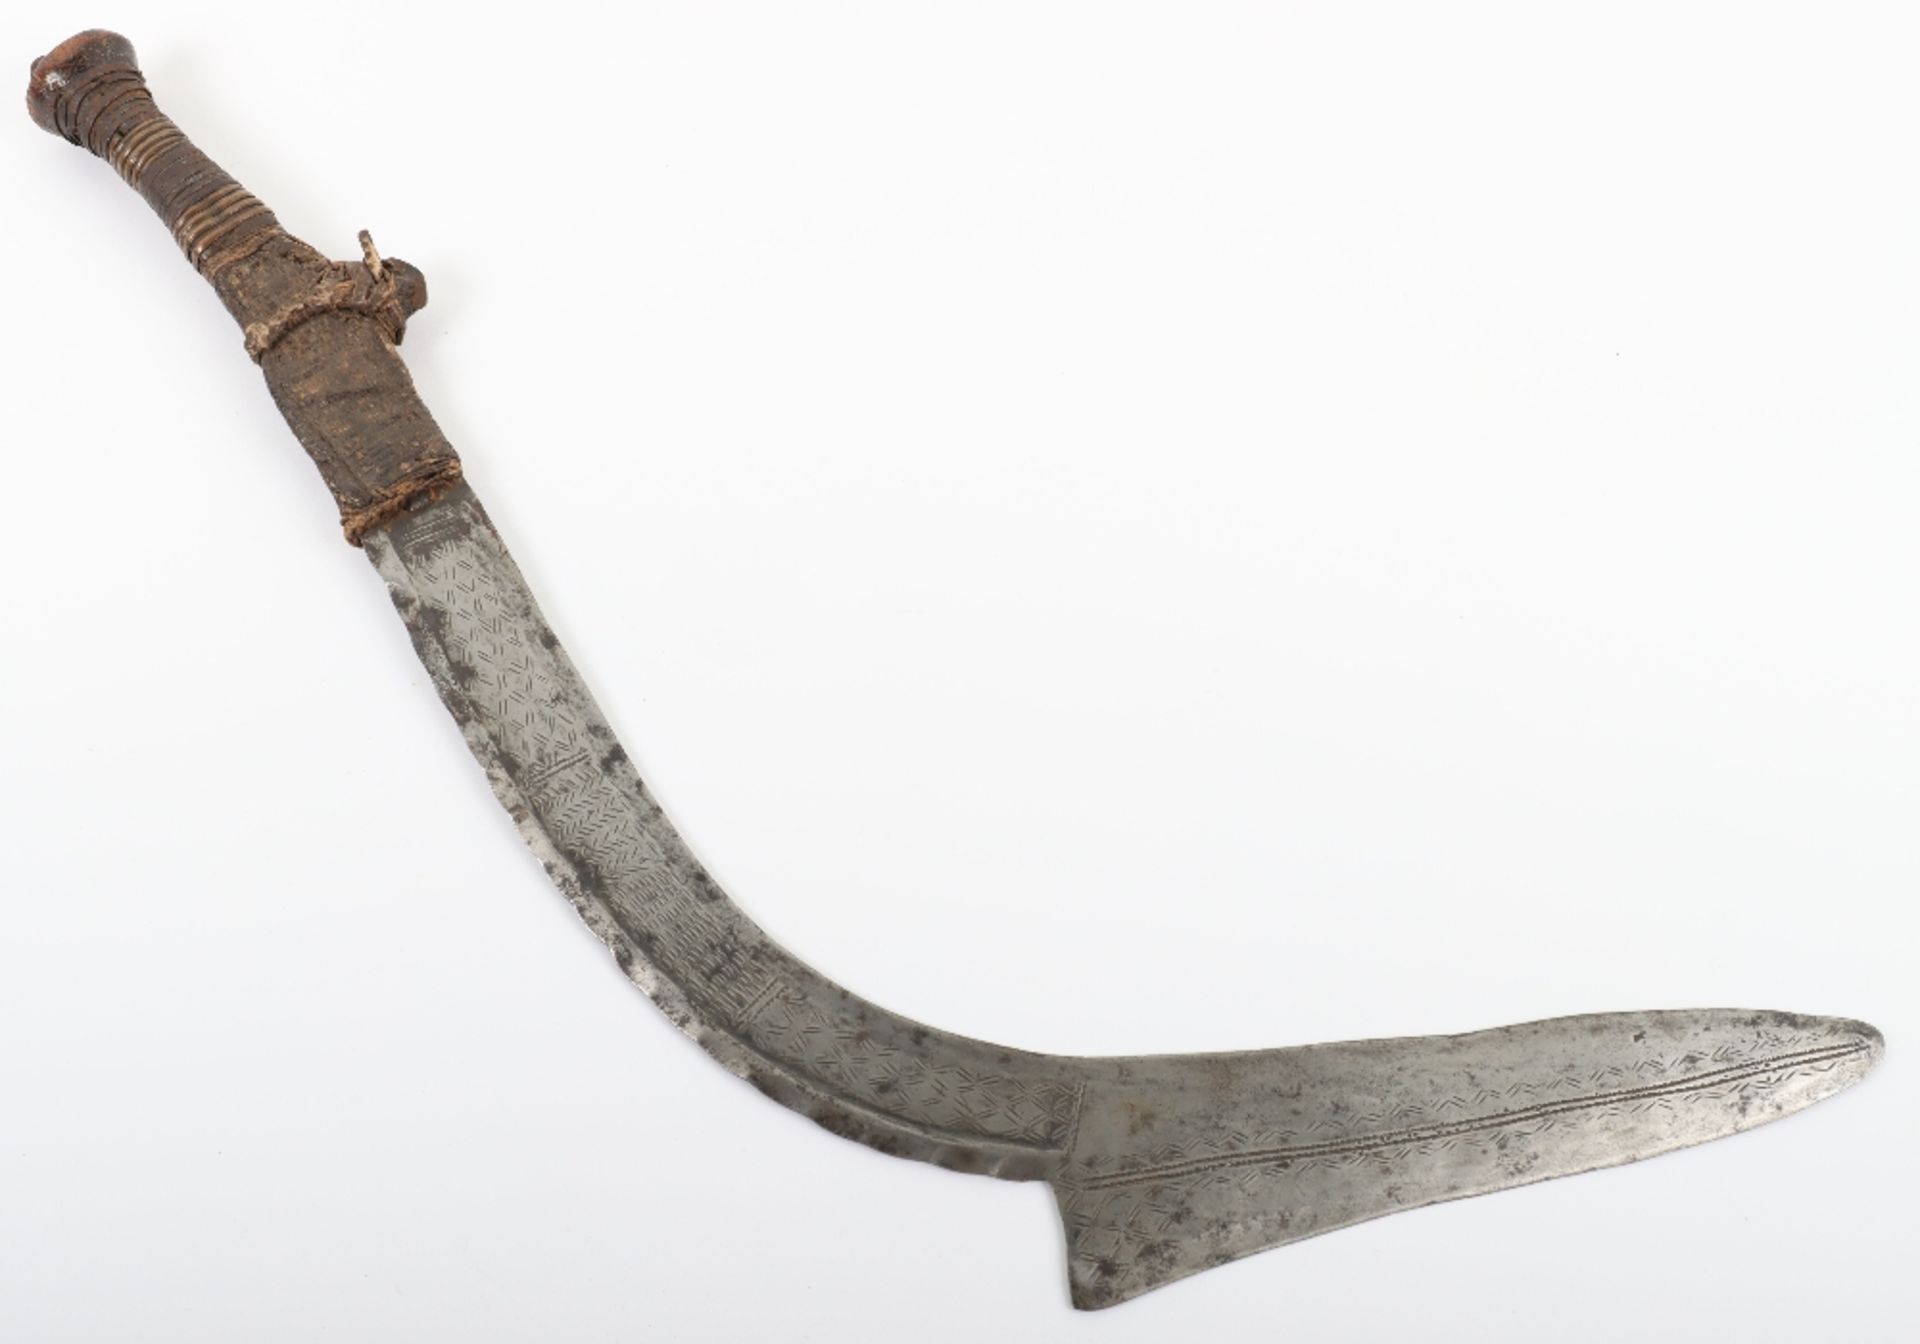 Large Curved Banza Throwing Knife Used by the Azande of Southern Sudan